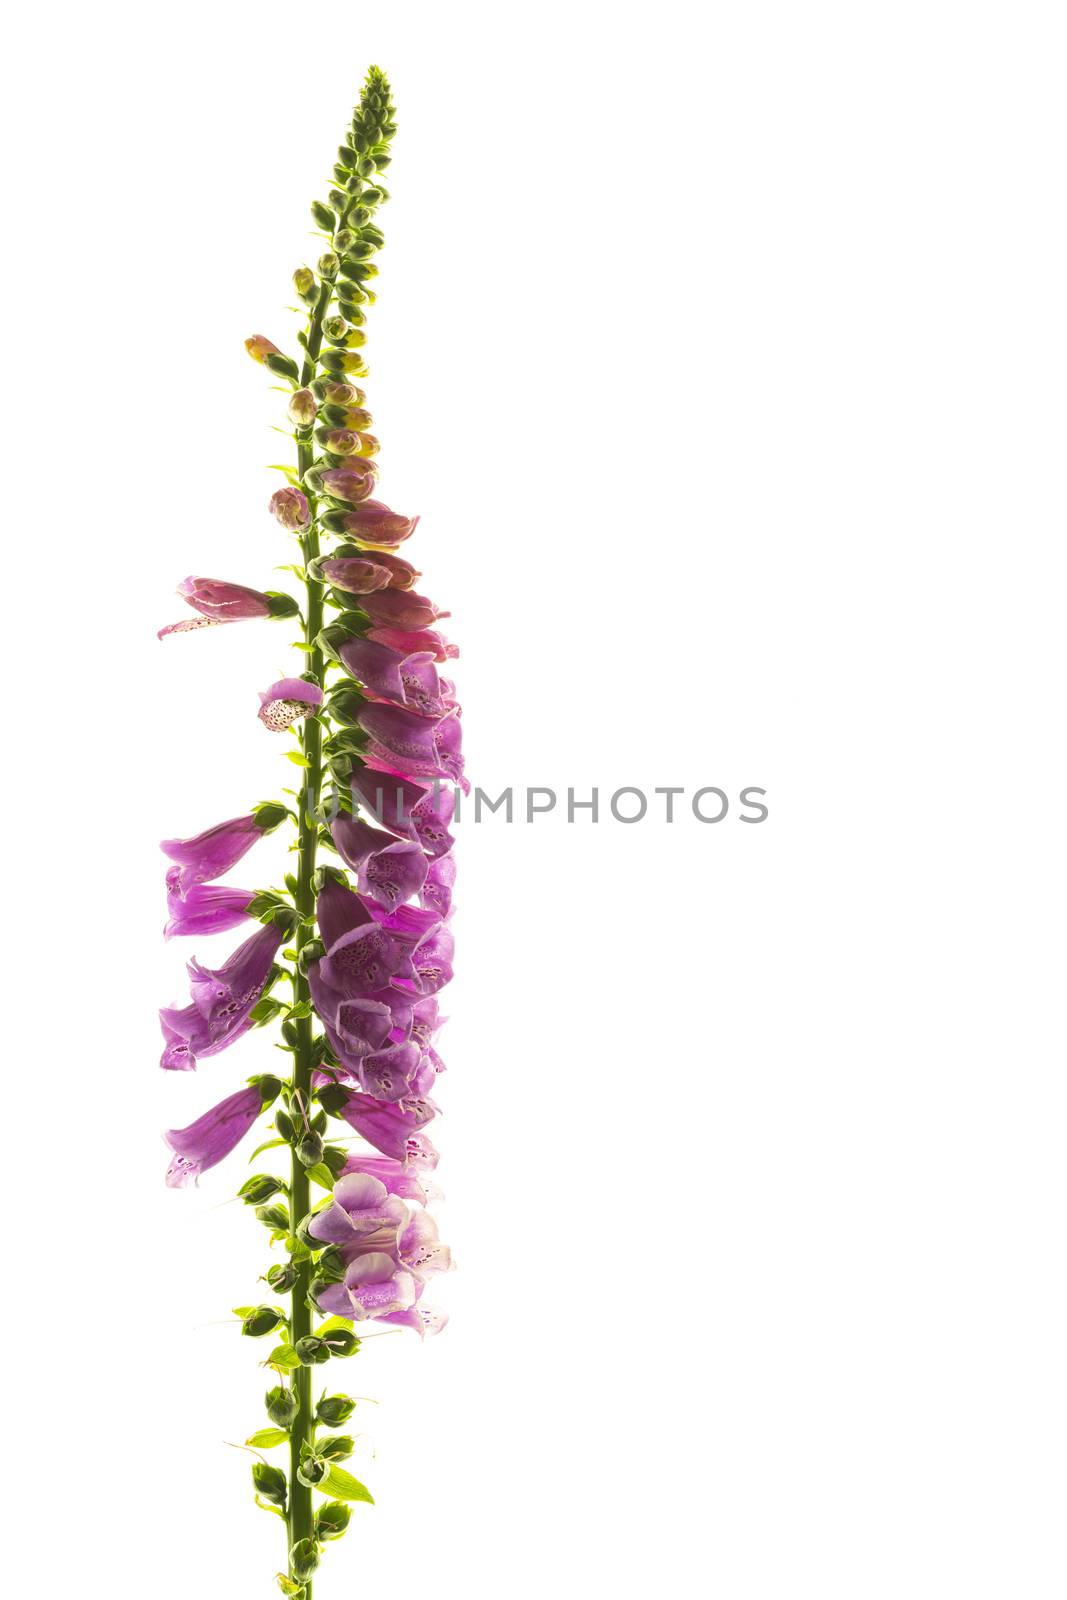 Purple foxglove flowers isolated on white background by sashokddt